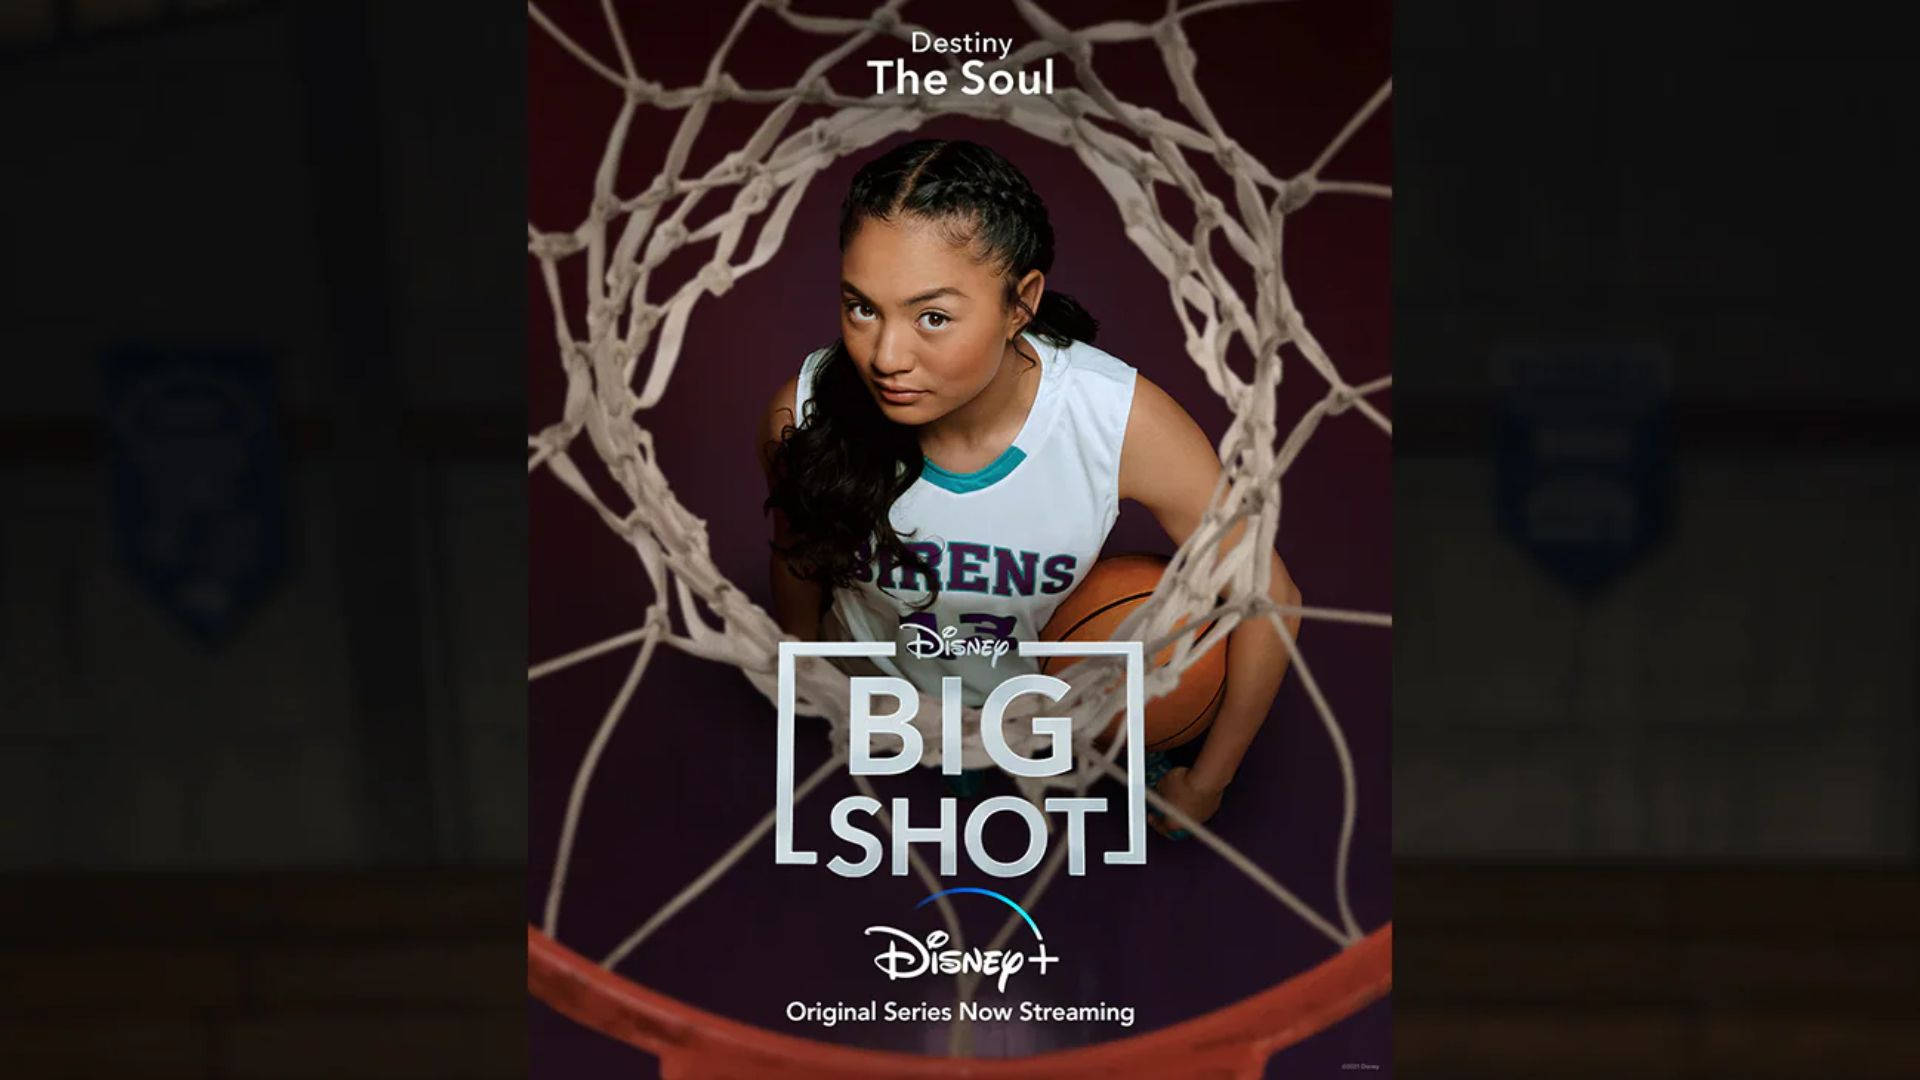 An Epitome of Sporty Ambition - Big Shot Destiny Winters Wallpaper